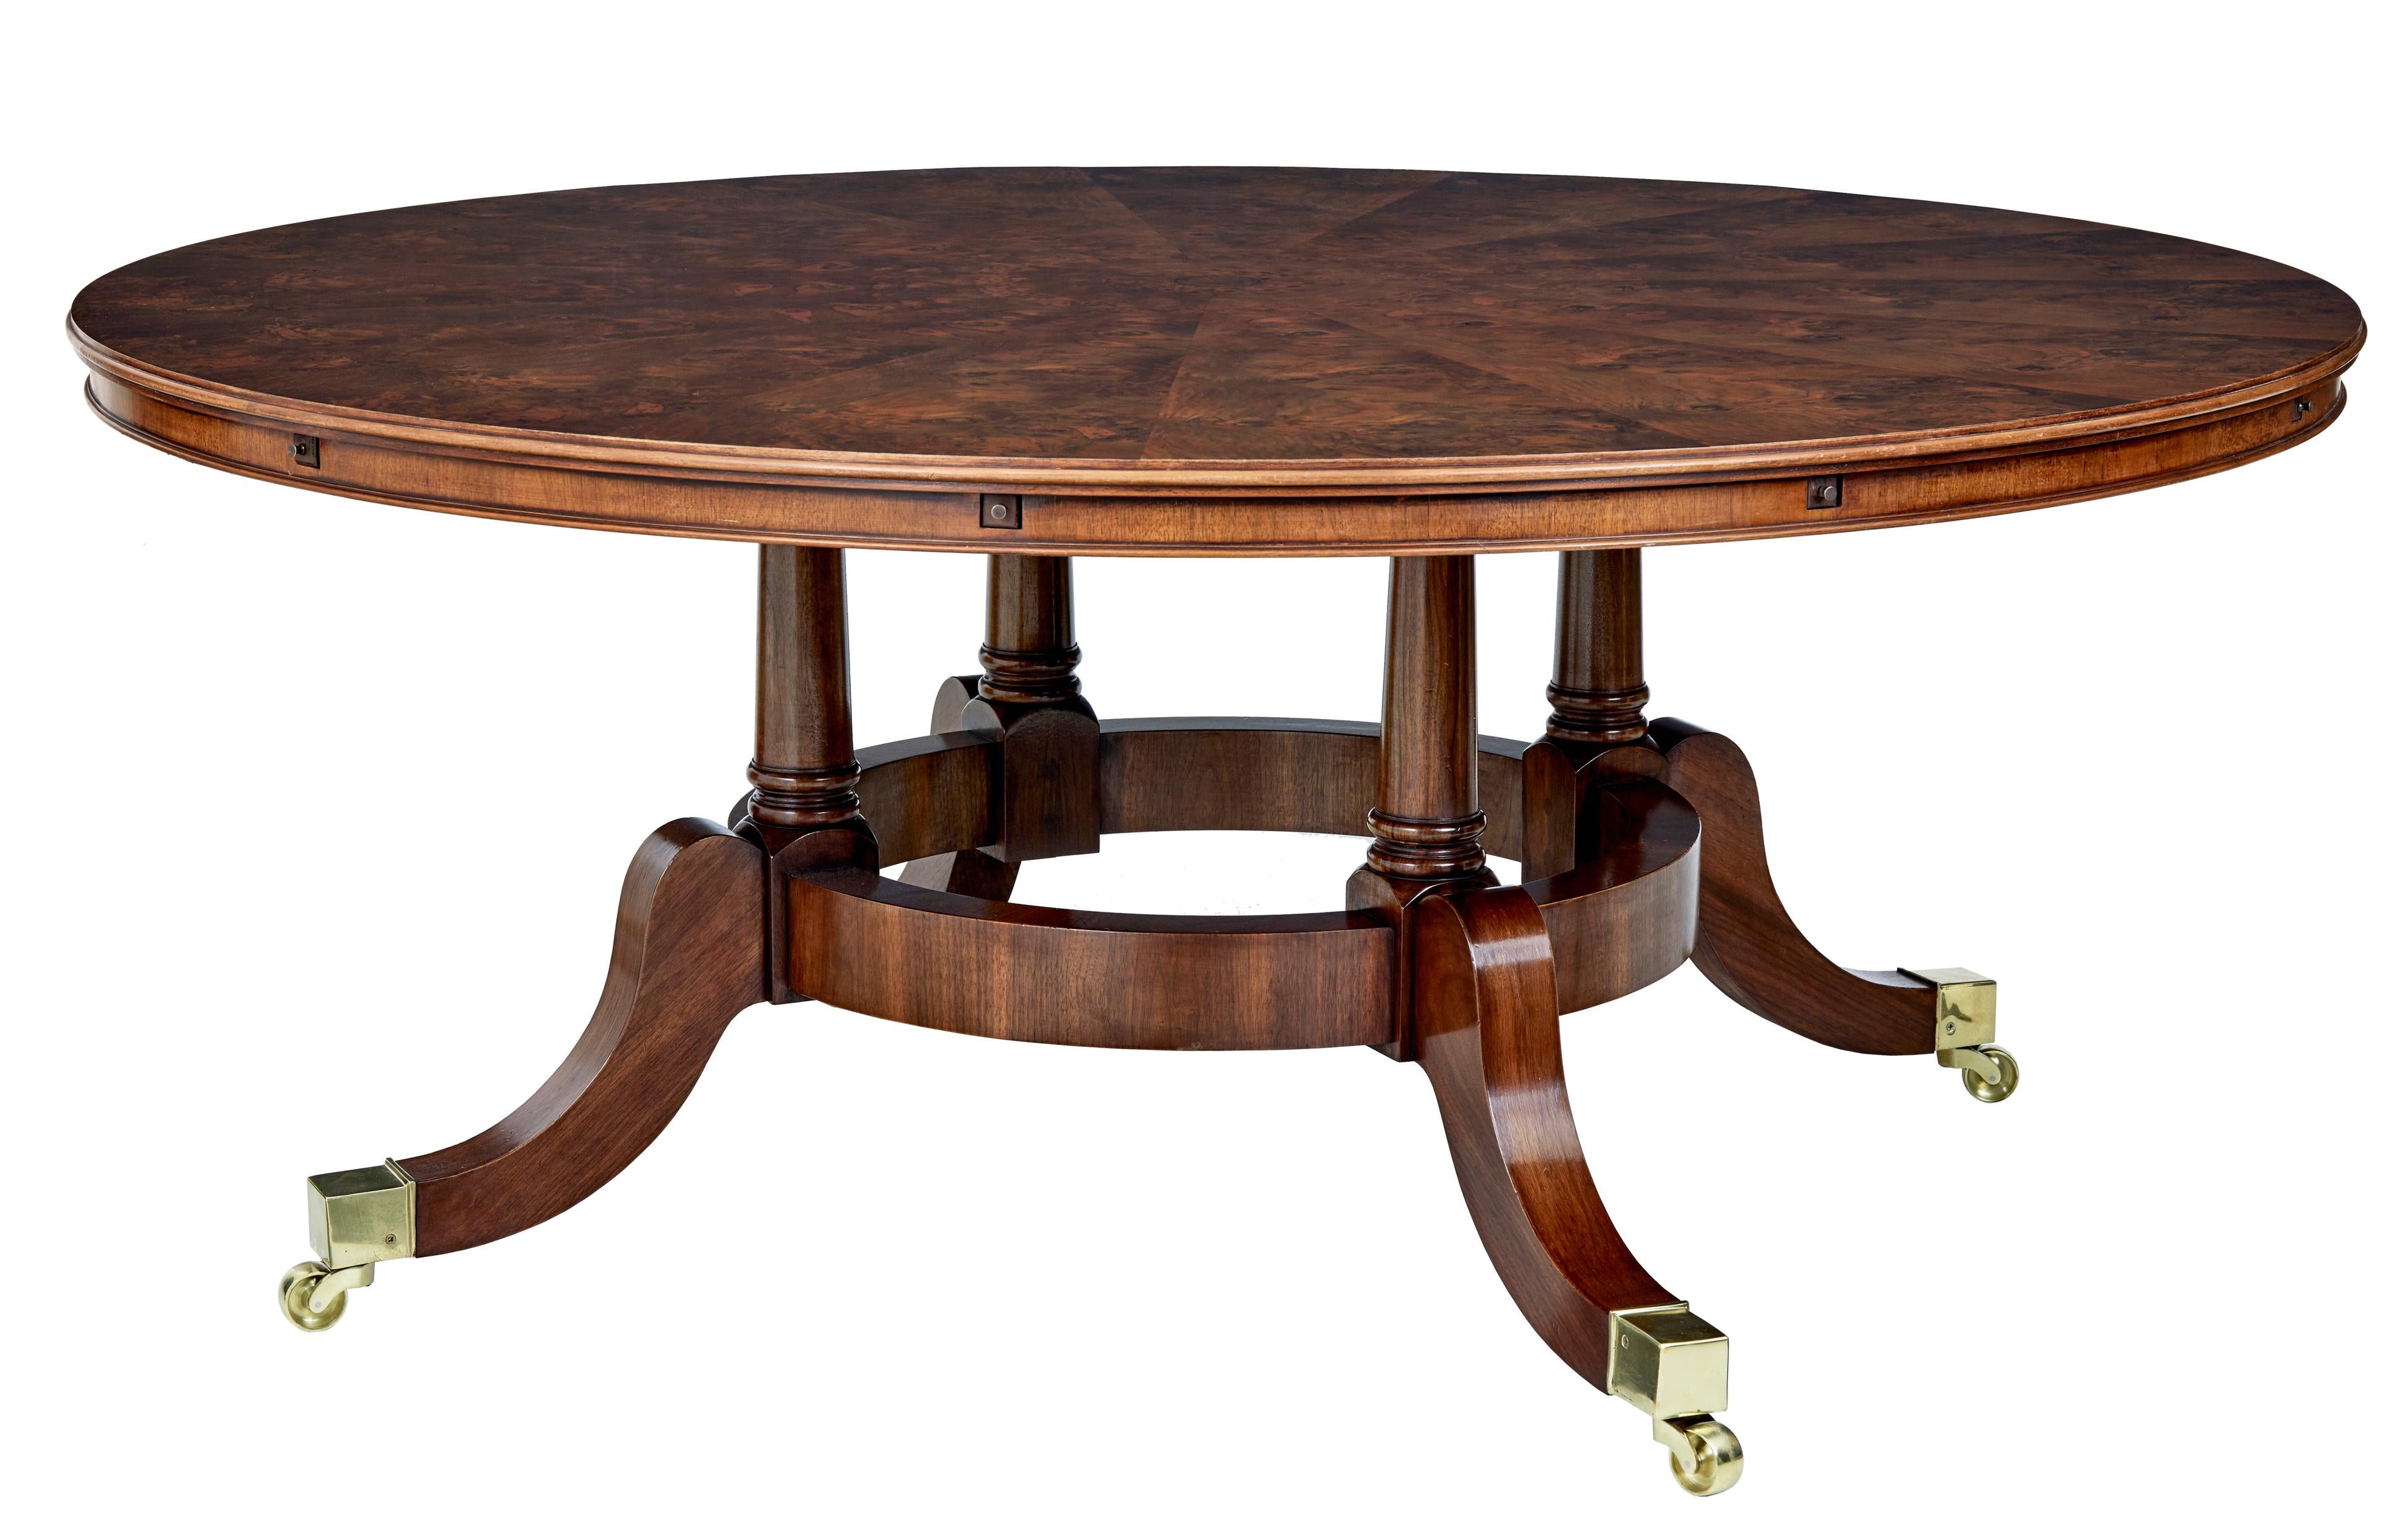 Burr walnut regency design jupe extending dining table.

Fine quality burr walnut table of grand proportions at over 100 inches in diameter and capable of seating 14 people in its extended form.

Veneered in stunning walnut which is arranged